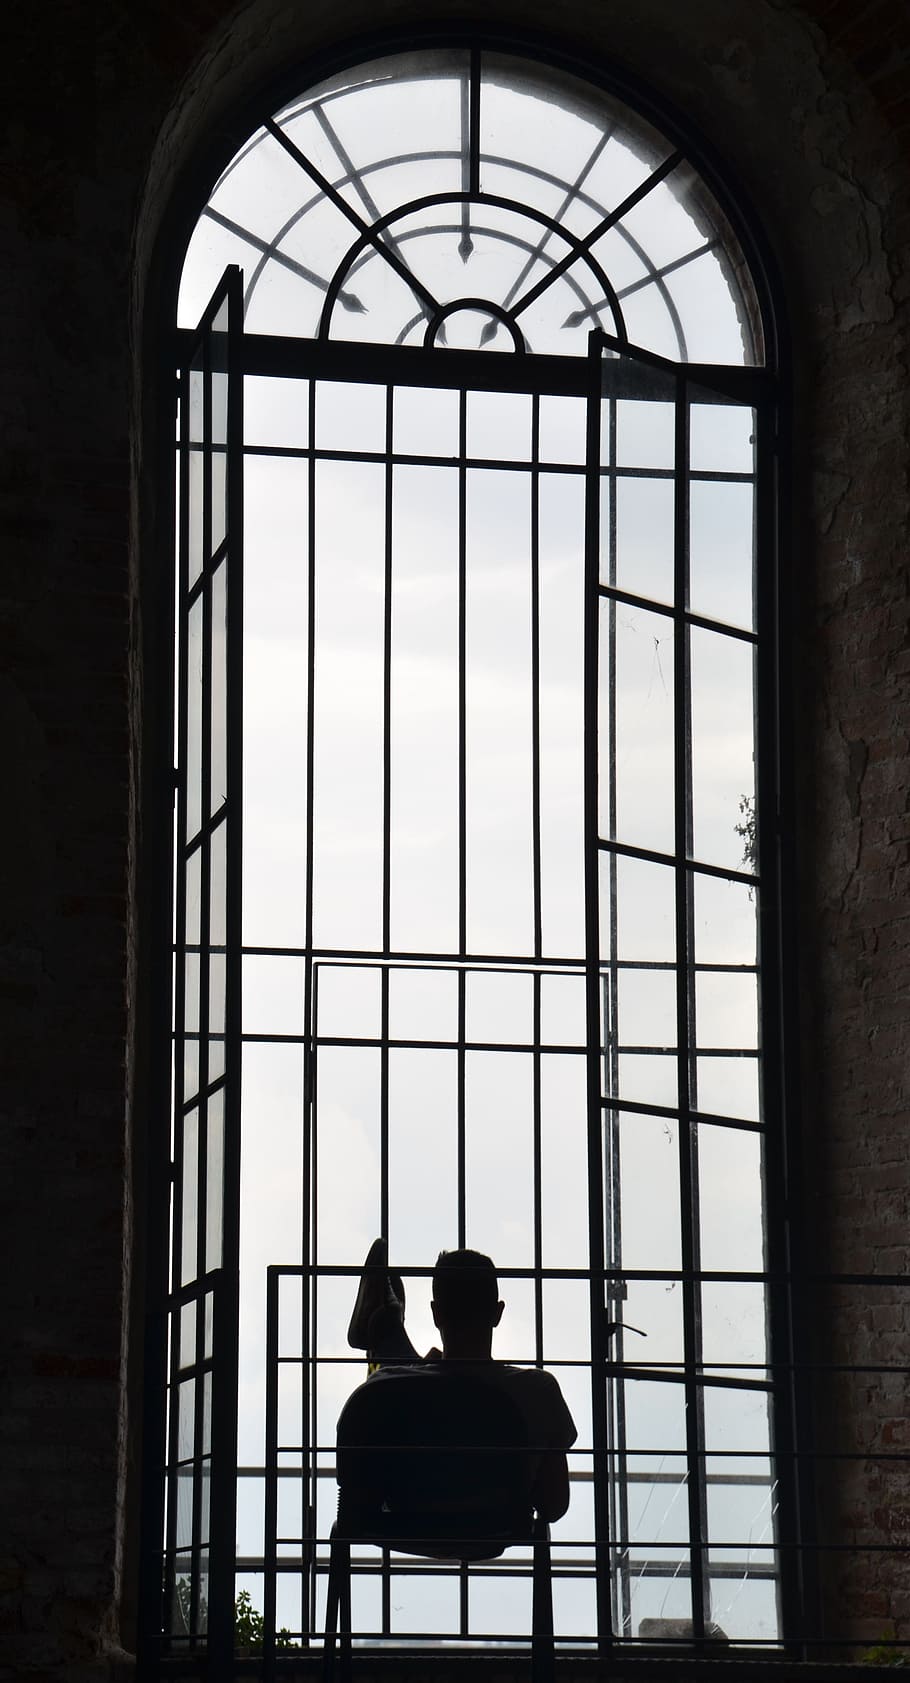 black, metal window, opened, psychology, lonely, depression, window, grid, sit, relax